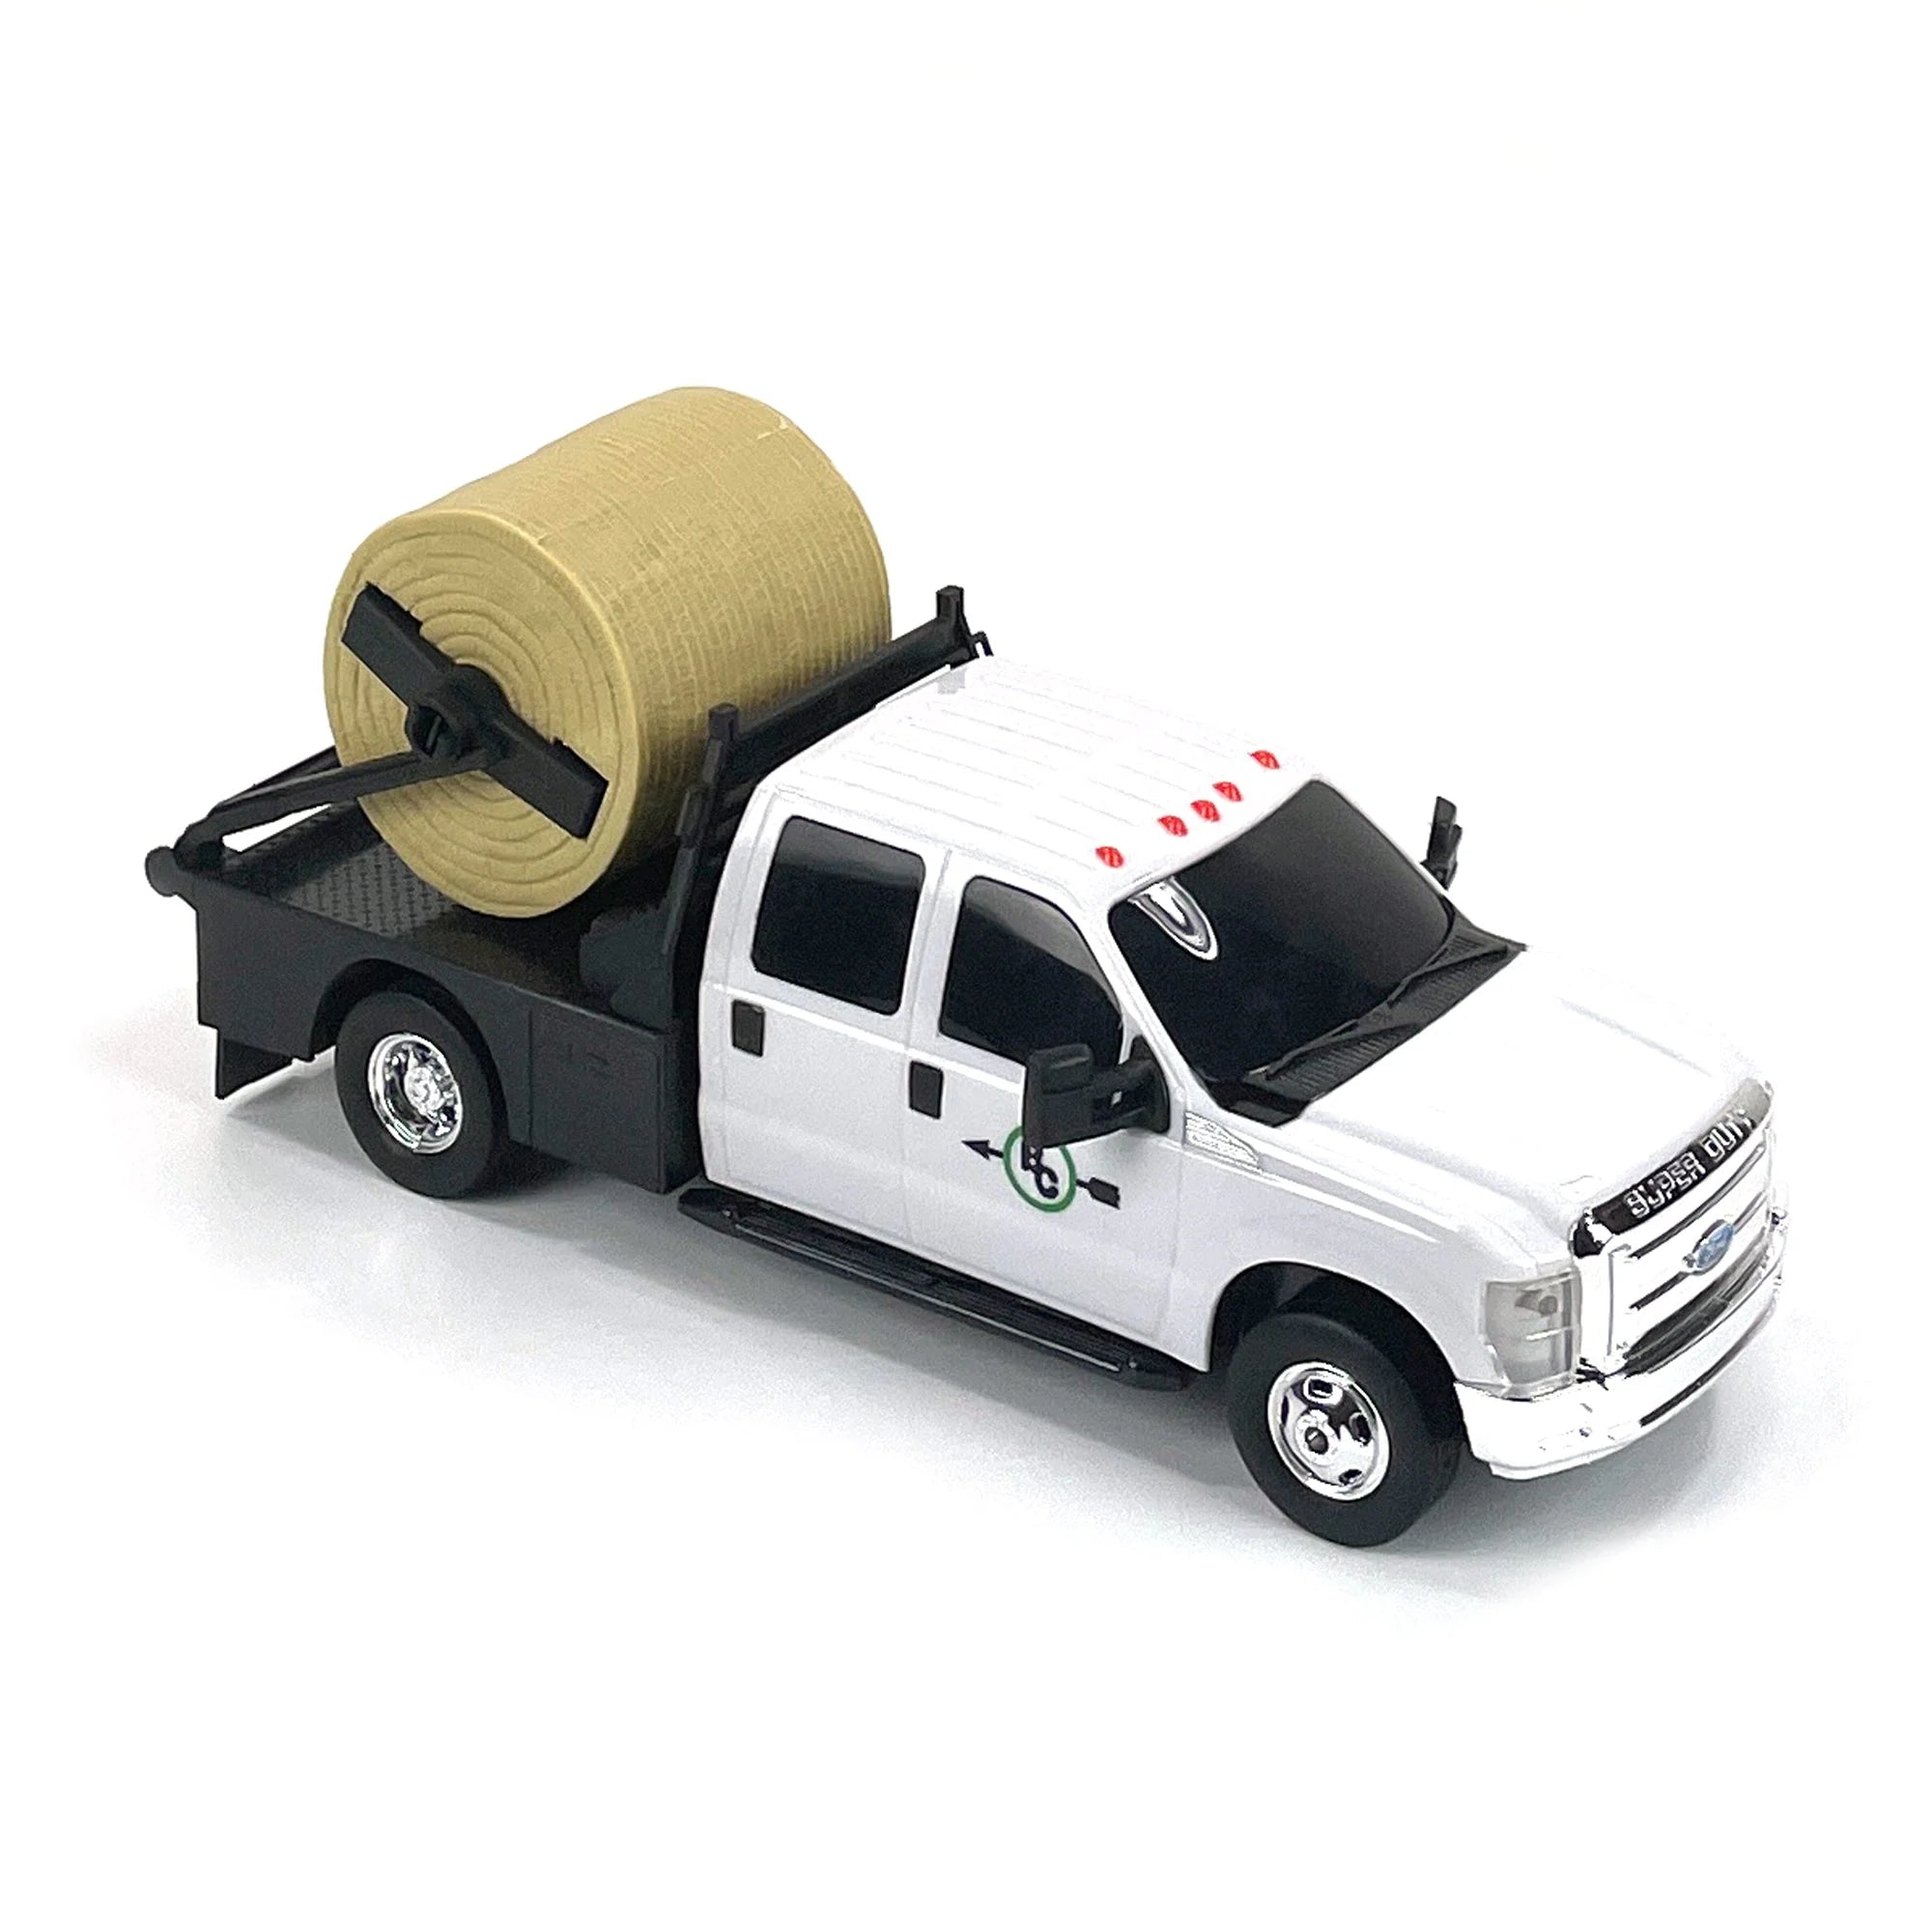 Big Country Toys Ford Flatbed Truck-BIG COUNTRY TOYS-Little Giant Kidz